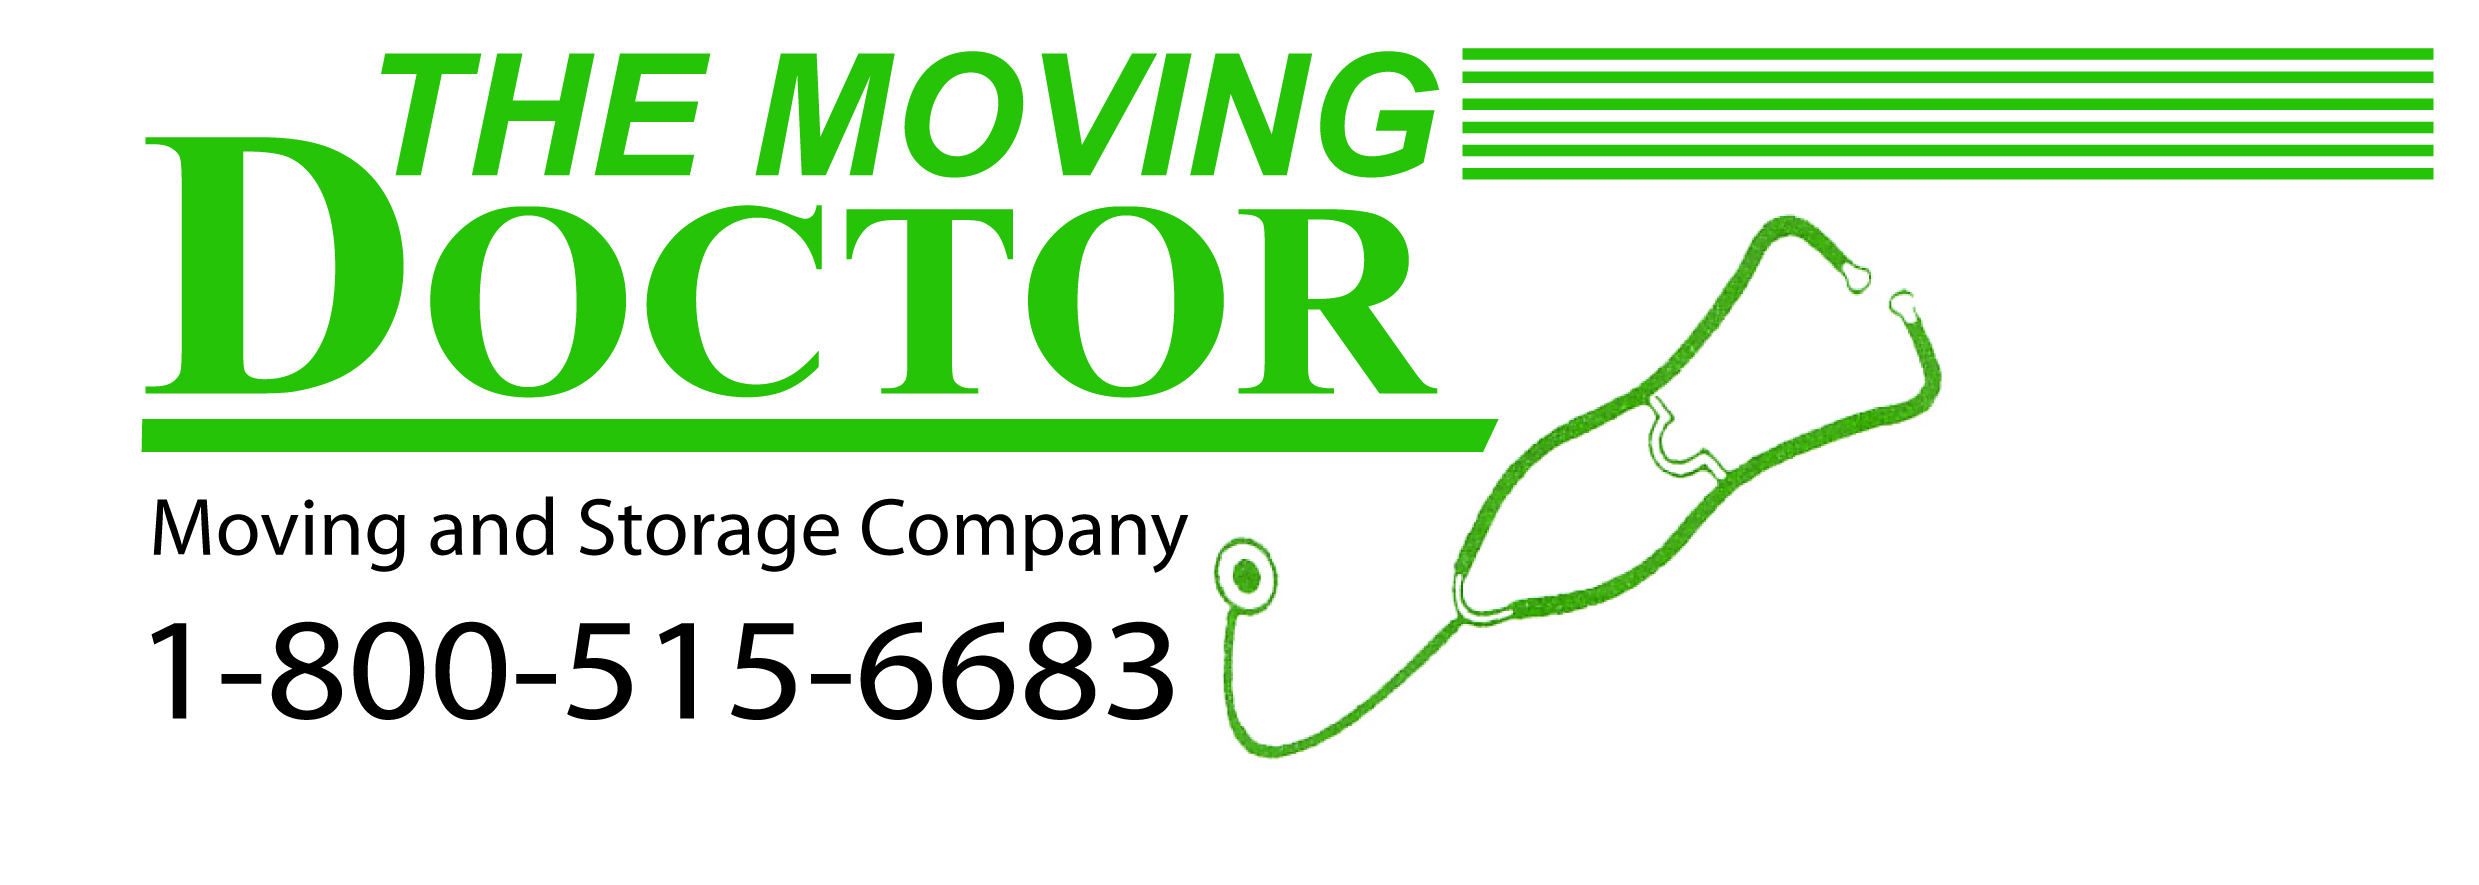 The Moving Doctor Logo